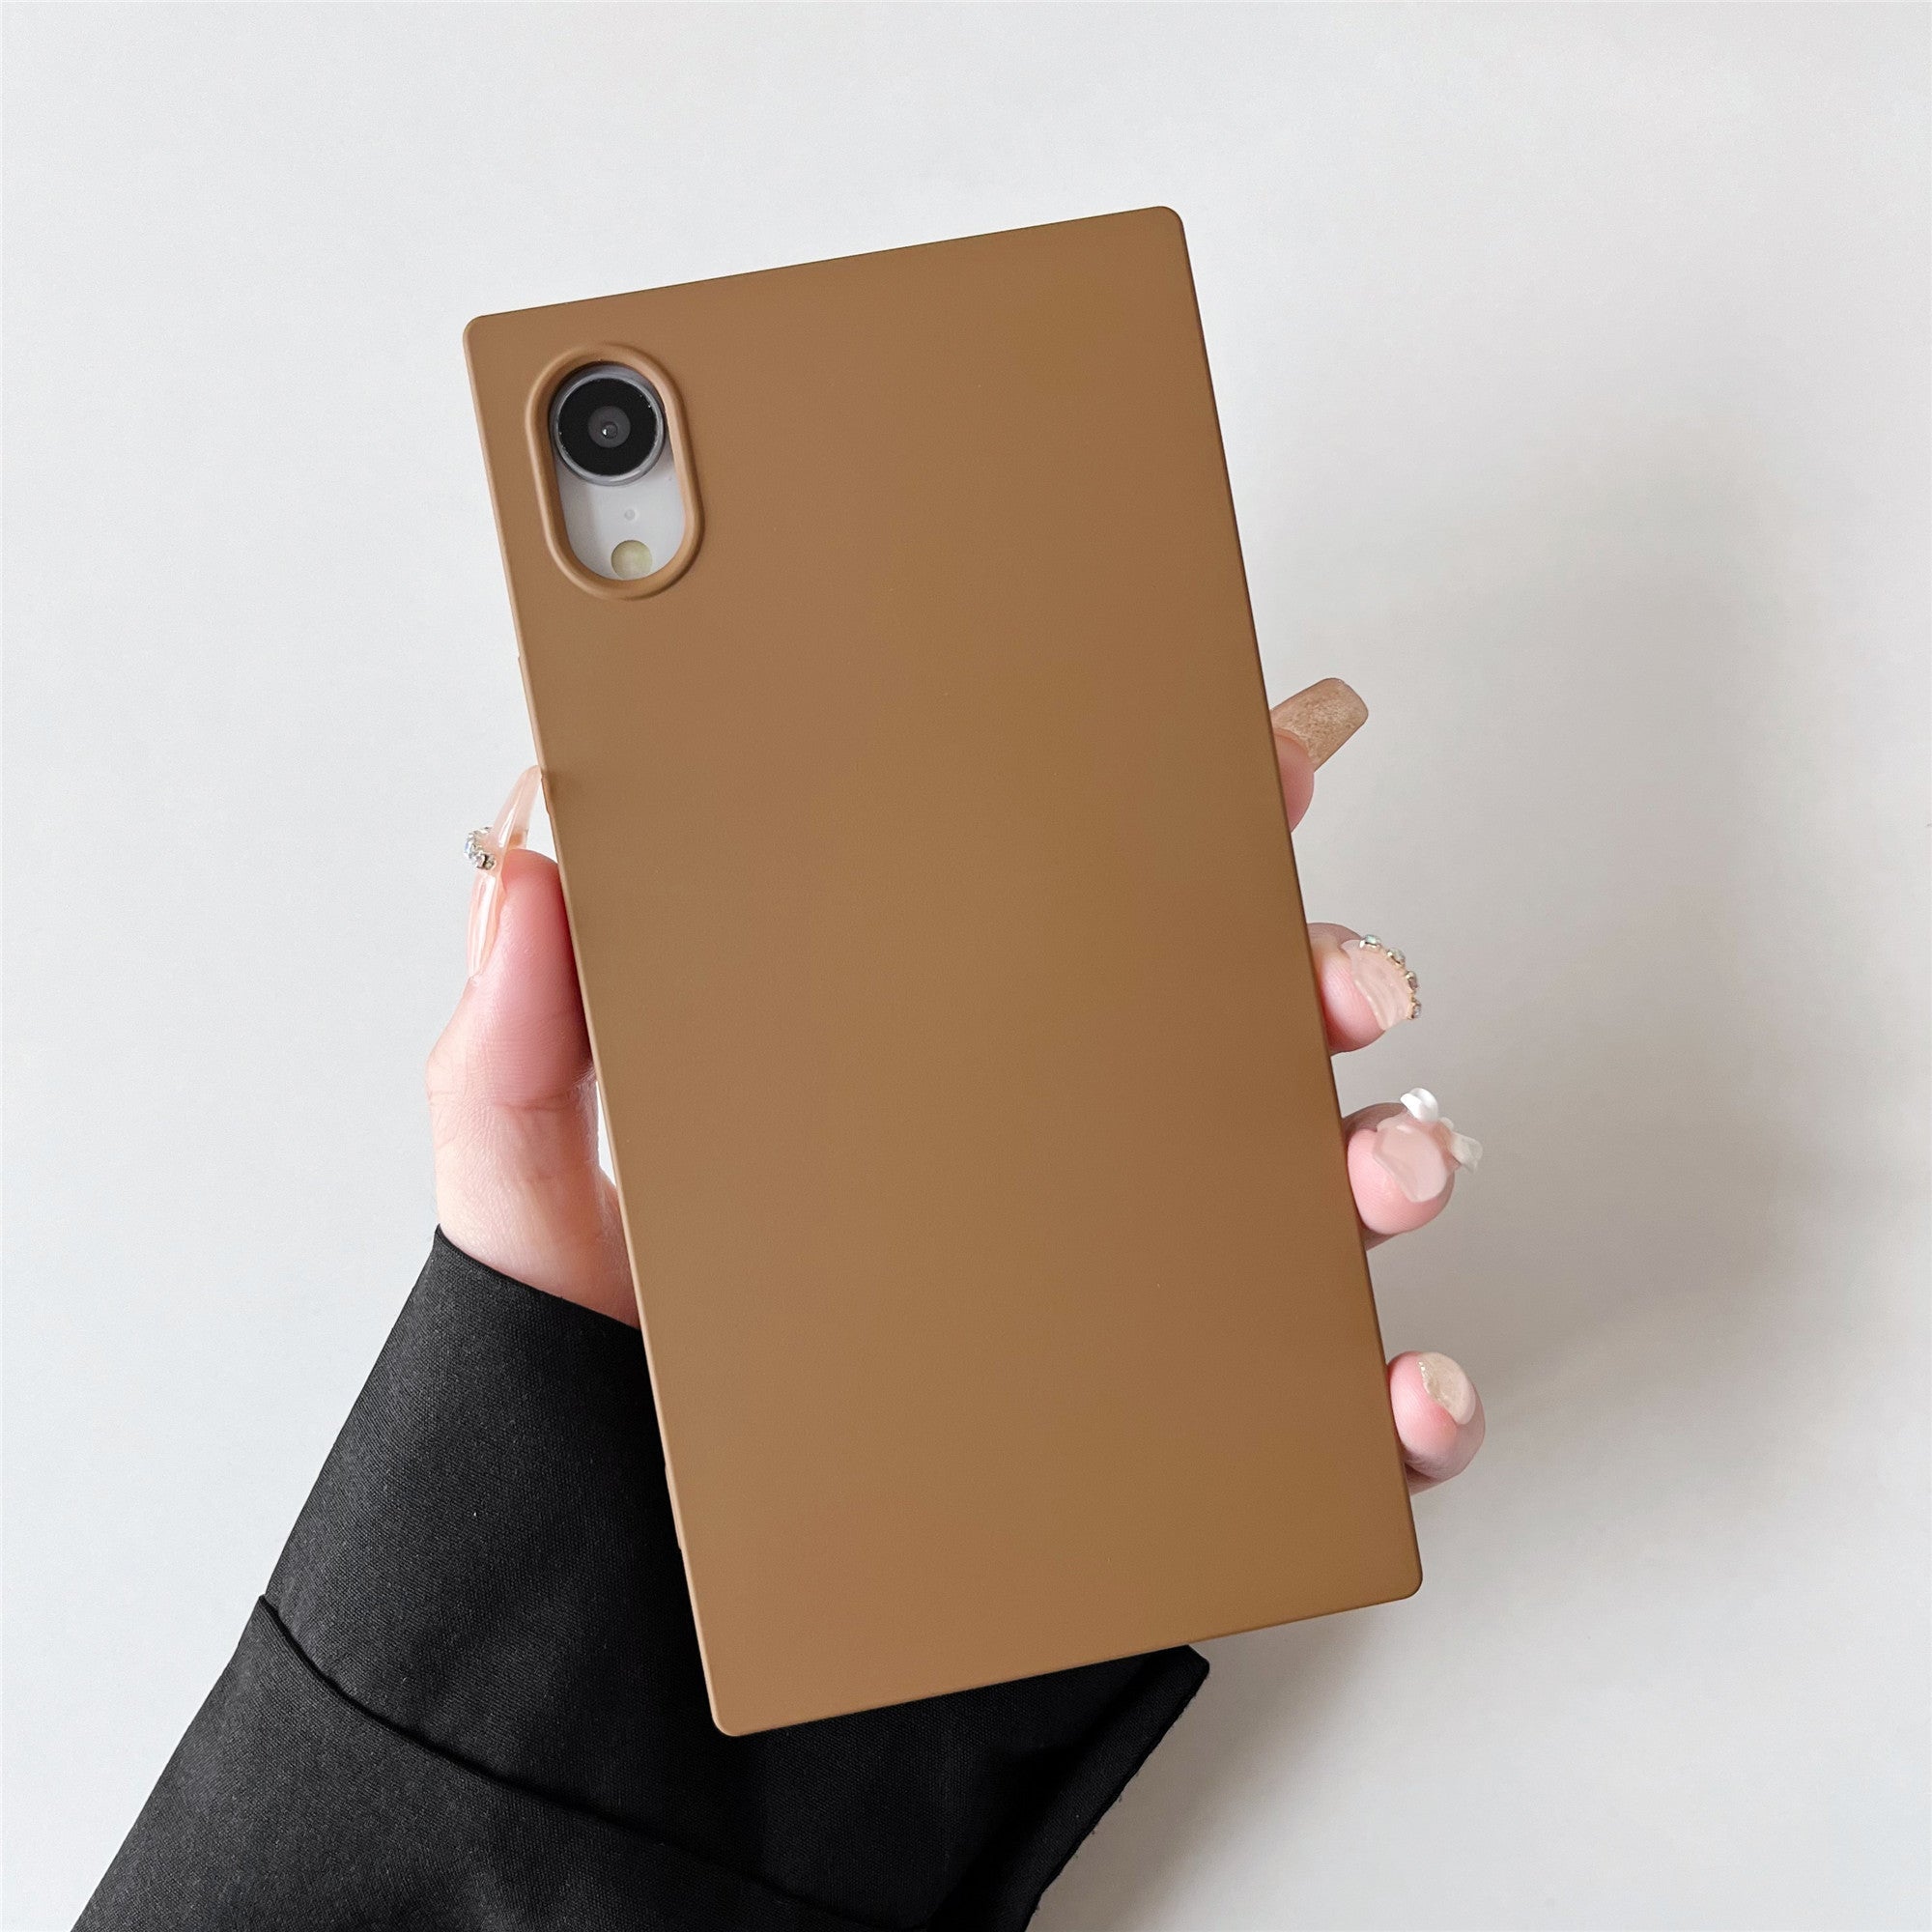 iPhone XR Case Square Silicone Neutral Color (Golden Brown)